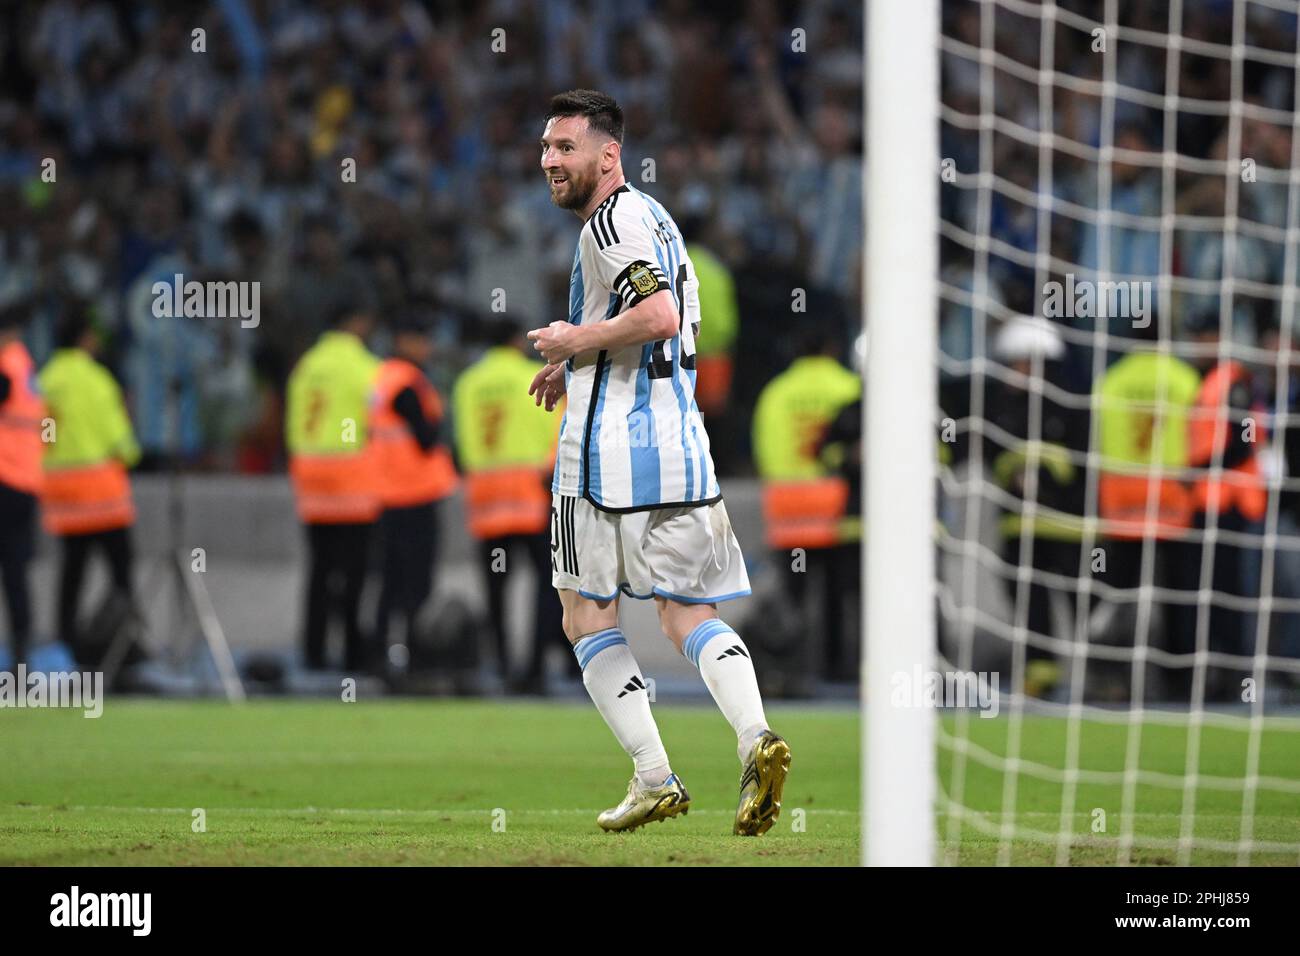 Santiago del Estero, Argentina, 28th Mar, 2023. Lionel Messi of Argentina, during the match between Argentina and Curacao, for the International Friendly 2023, at Unico Madre de Ciudades Stadium, in Santiago del Estero on March 28. Photo: Luciano Bisbal/DiaEsportivo/Alamy Live News Stock Photo